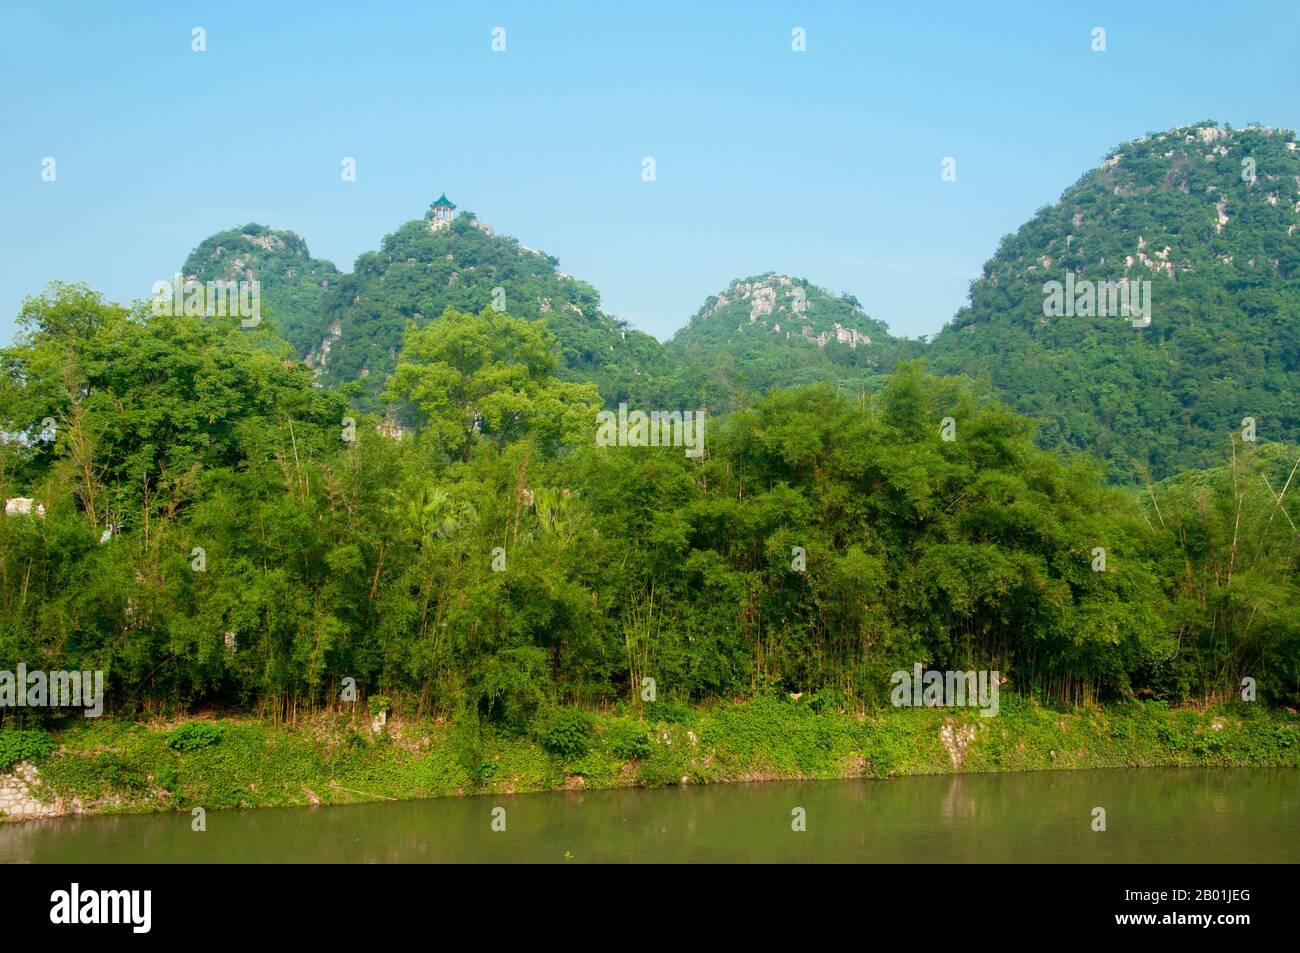 China: Qixing Gongyuan (Seven Star Park).  Qixing Gongyuan or Seven Star Park gained its name from the position of its seven hills, which suggest the pattern of the Plough (Big Dipper) constellation. The park has been a tourist attraction for more than 1,000 years.  The name Guilin means ‘Cassia Woods’ and is named after the osmanthus (cassia) blossoms that bloom throughout the autumn period. Guilin is the scene of China’s most famous landscapes, inspiring thousands of paintings over many centuries. They are often called the ‘finest mountains and rivers under heaven’. Stock Photo